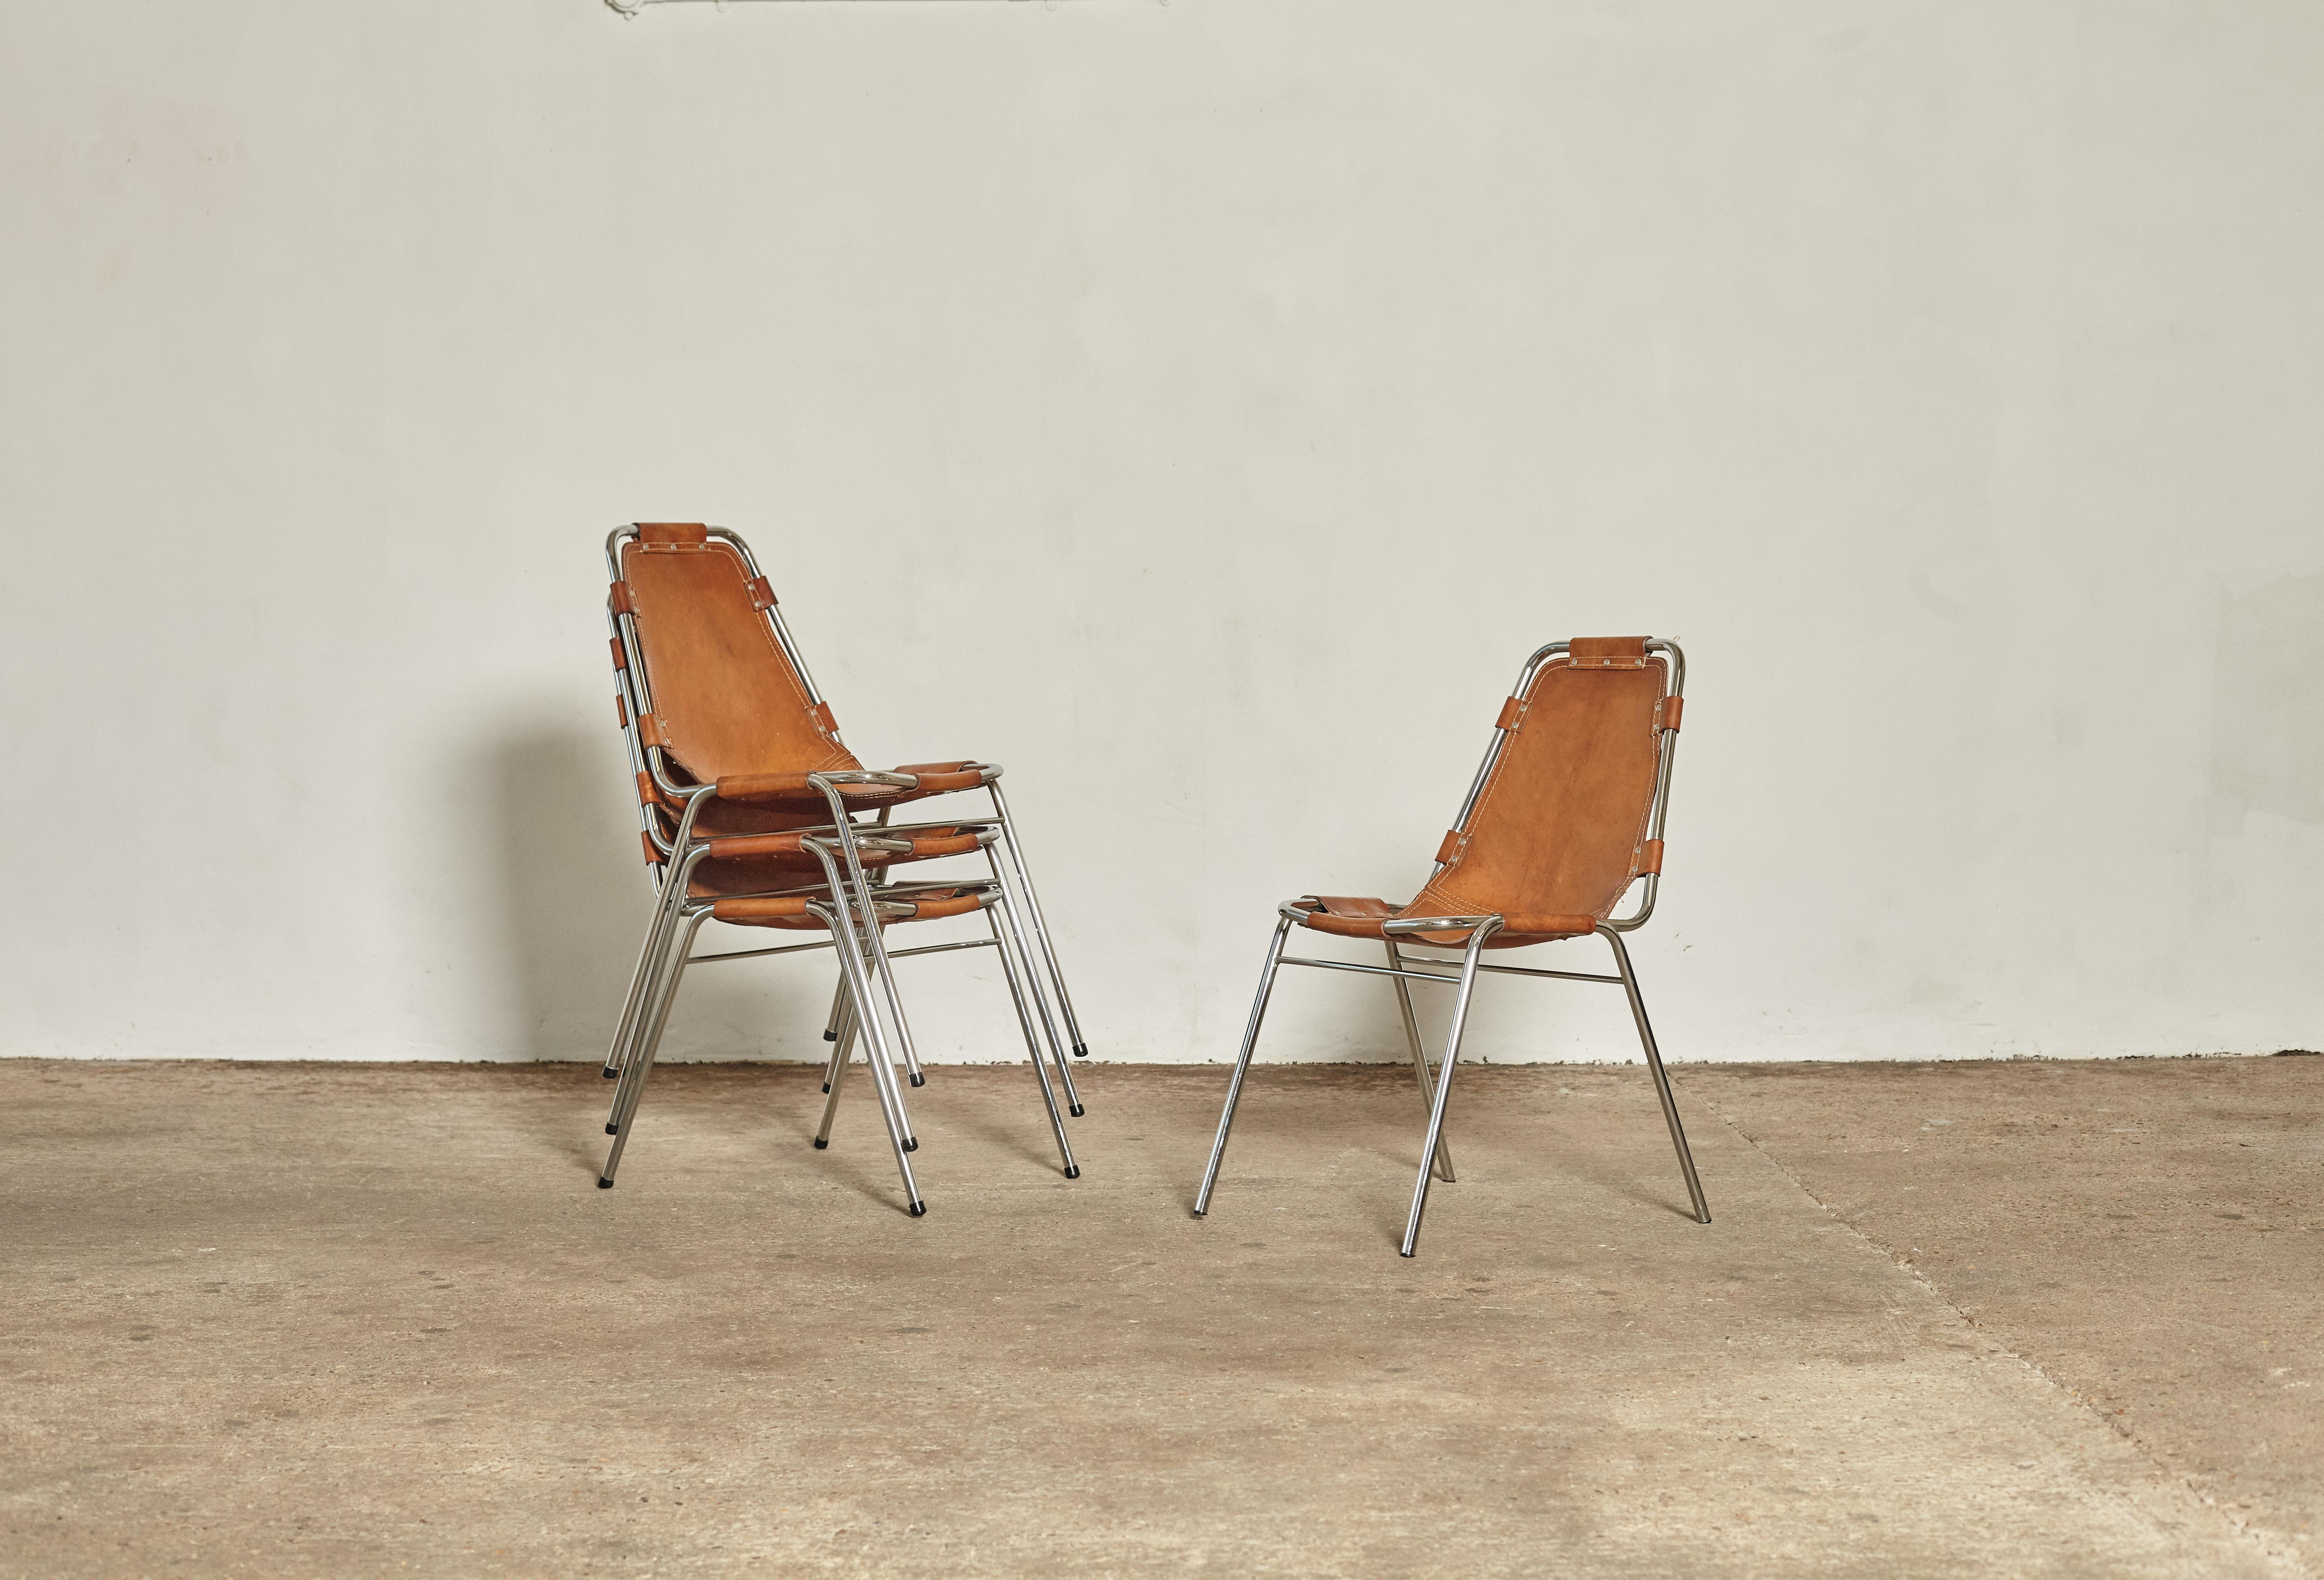 'Les Arcs' chairs in tubular steel and cognac leather, France or Italy, 1970s. Lightly patinated original leather. All original stitching intact which is rare. Very fine examples.

Les Arcs was a project on which Charlotte Perriand collaborated